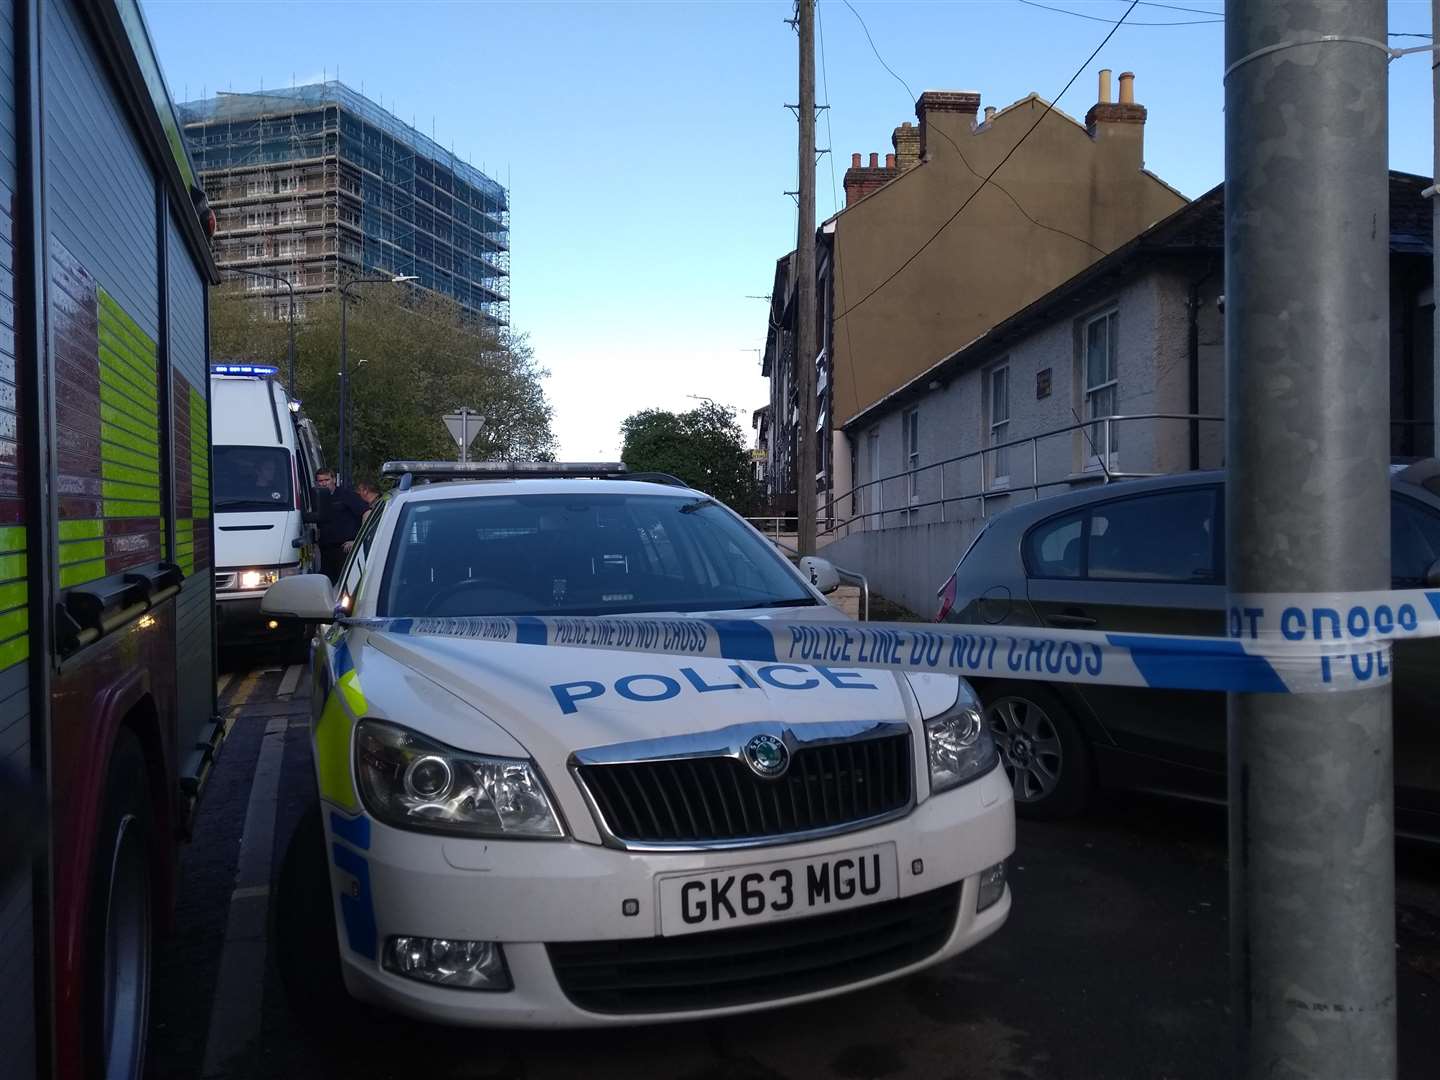 Maidstone Mosque confirmed it had received a "hate letter" with "white powder" inside